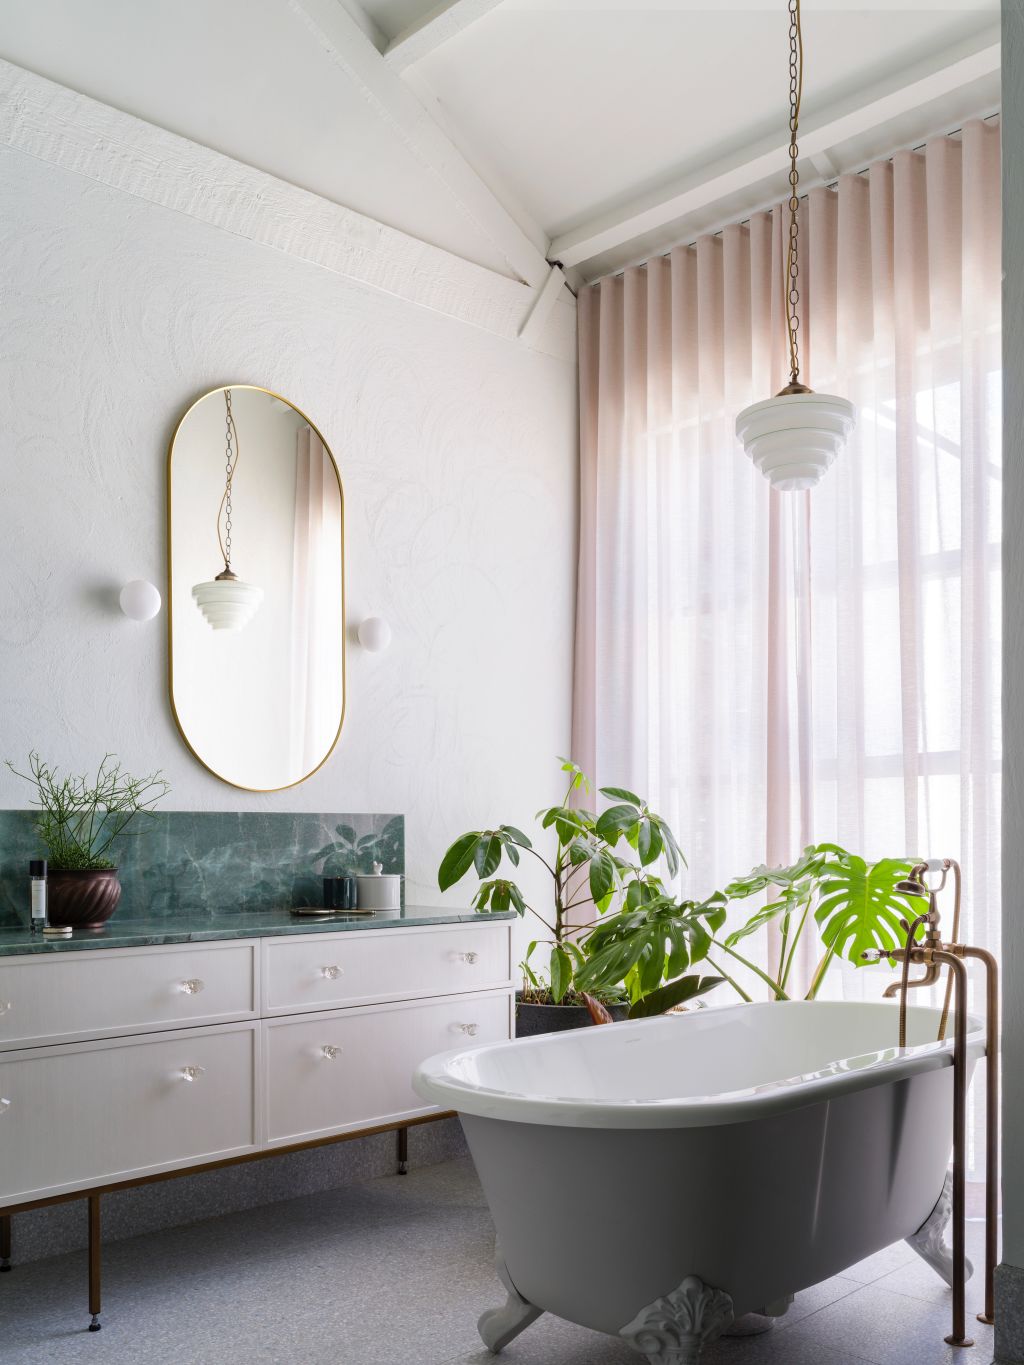 ... and bathrooms decorated in pink, green and black. Photo: Justin Alexander